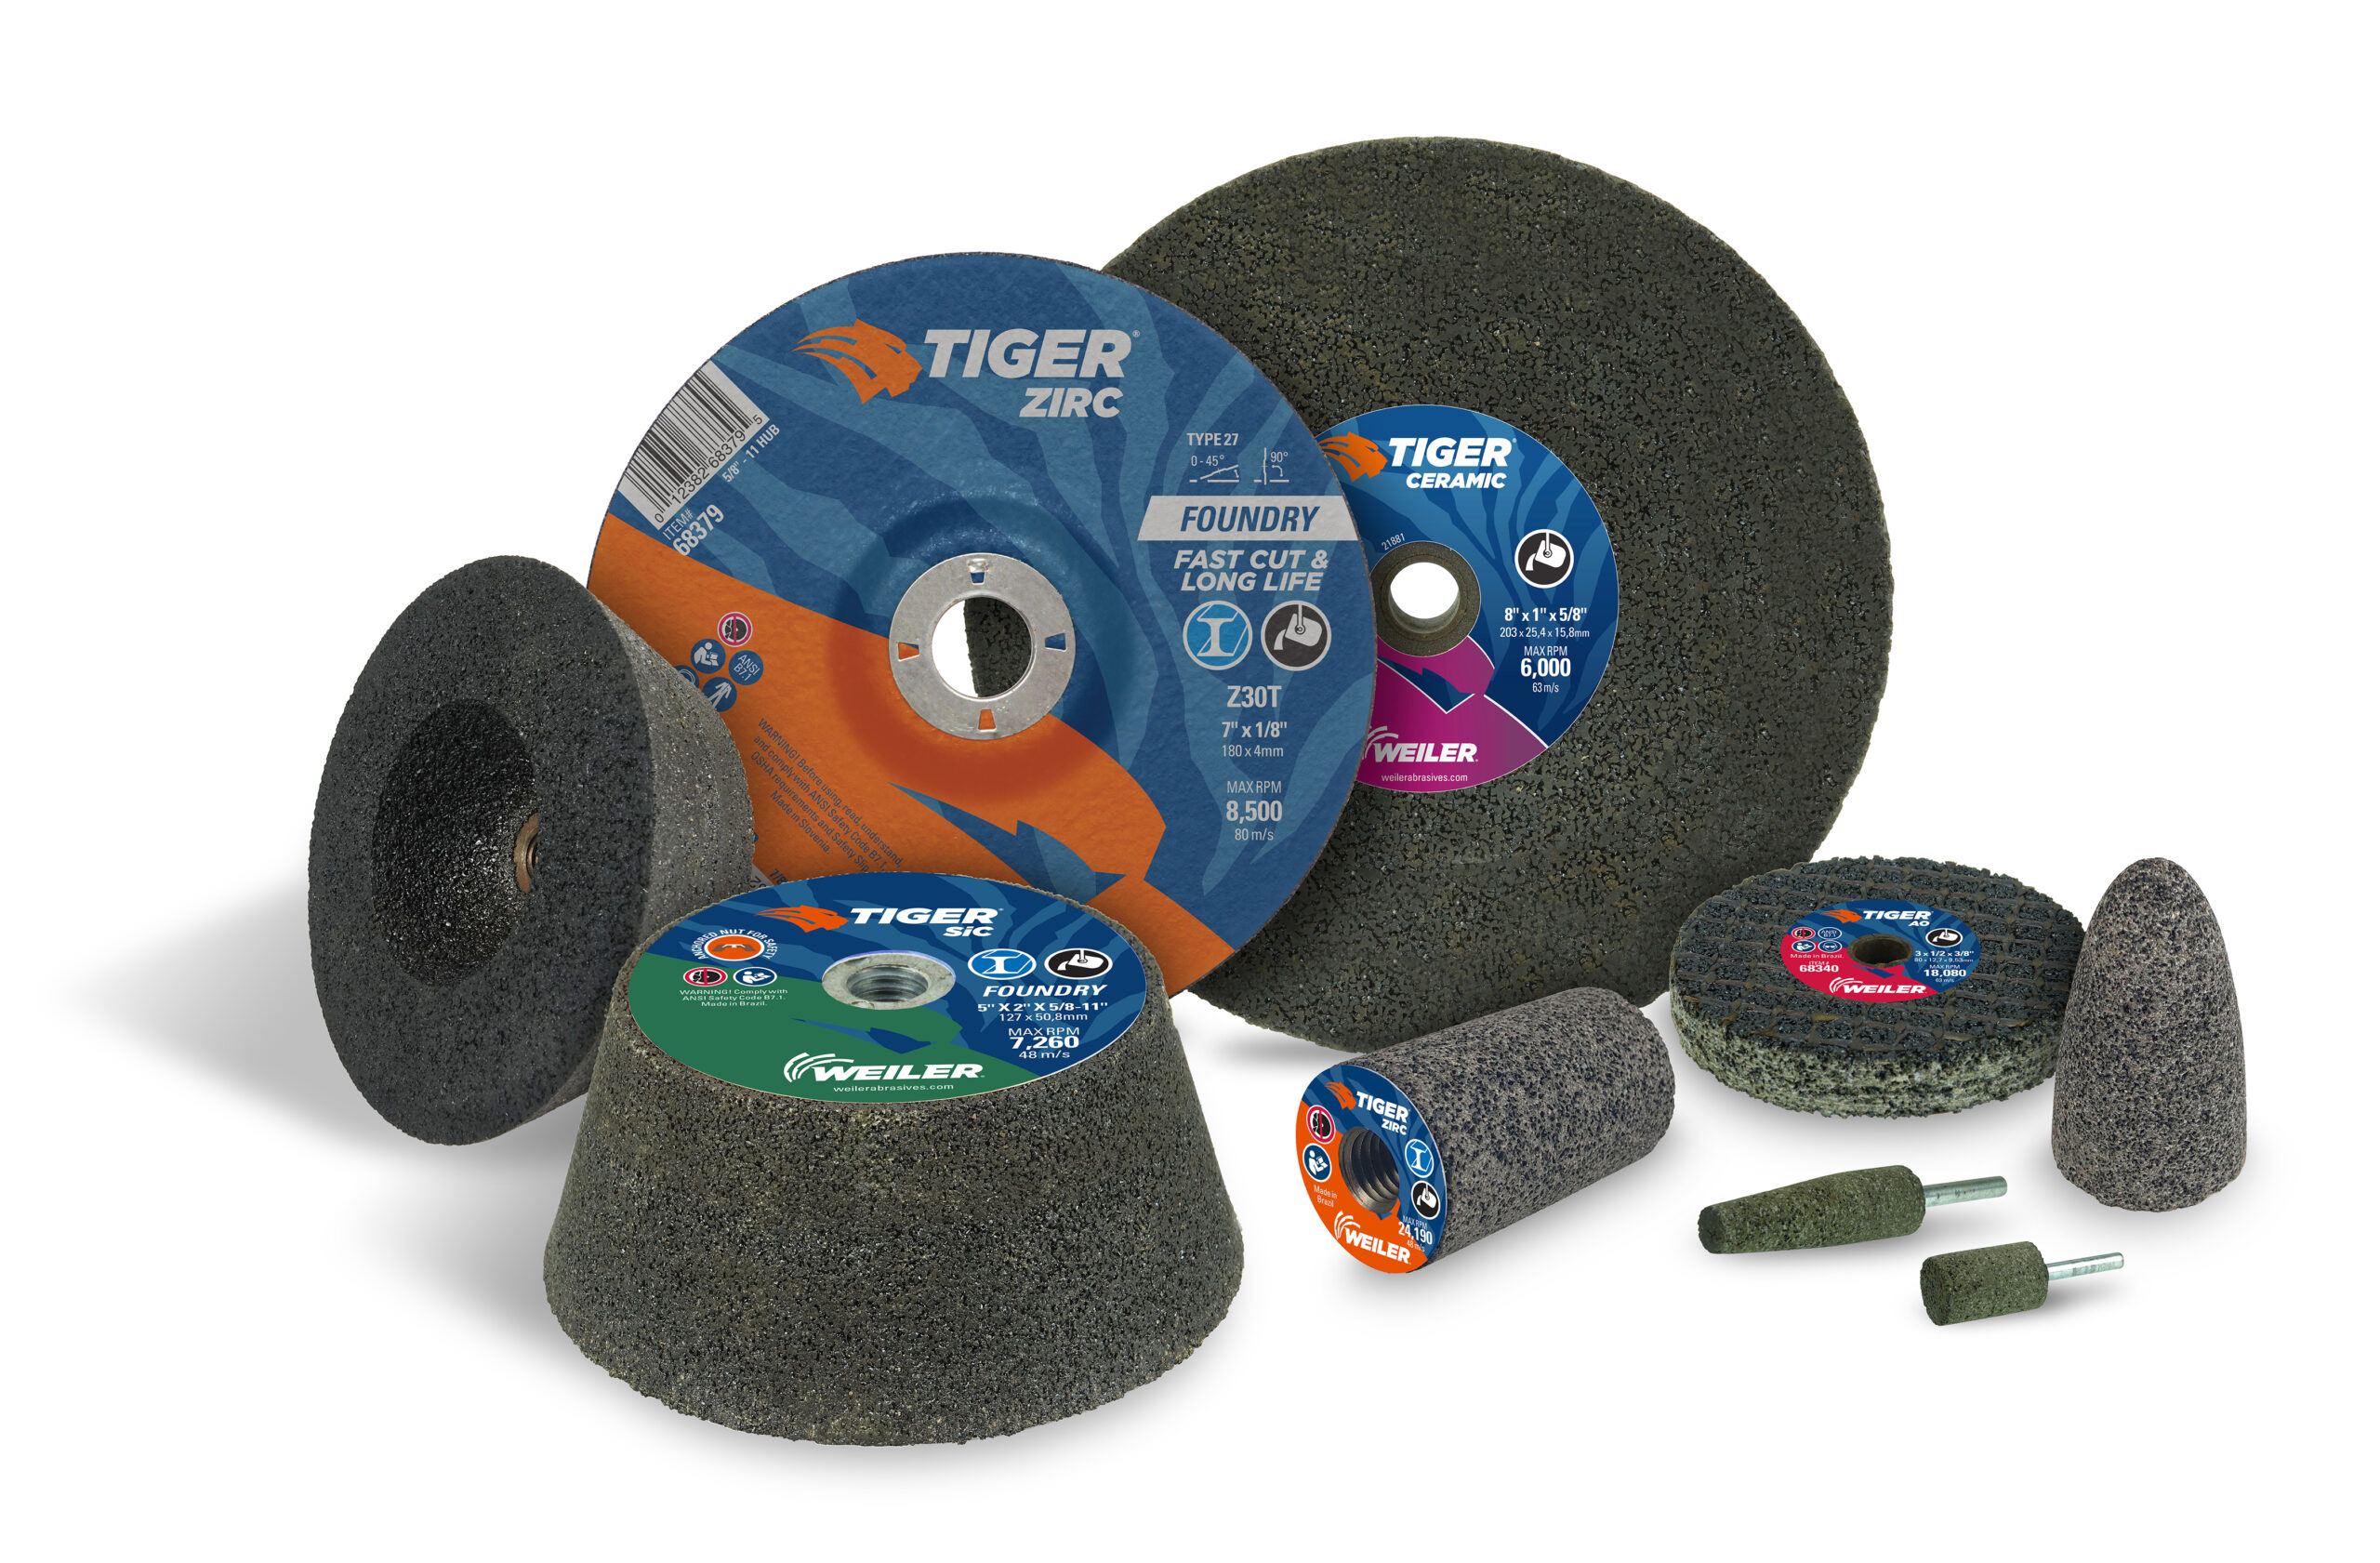 Weiler Abrasives Introduces Full Offering of Foundry Abrasives to Improve Safety, Productivity